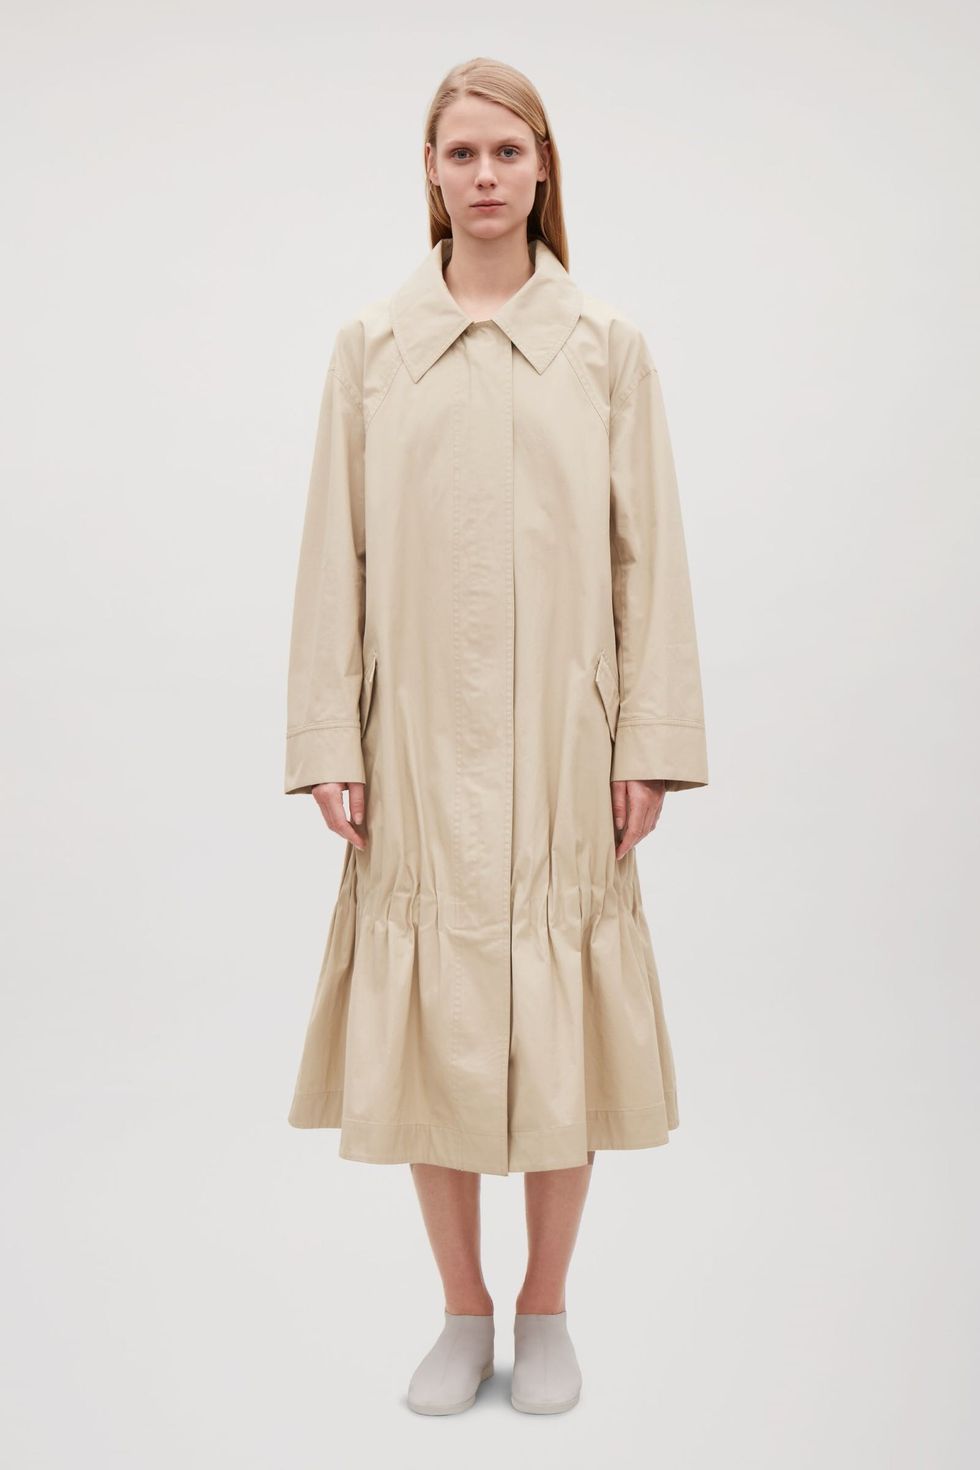 19 Head-Turning Trench Coats You Need to Invest in for Spring - Brit + Co